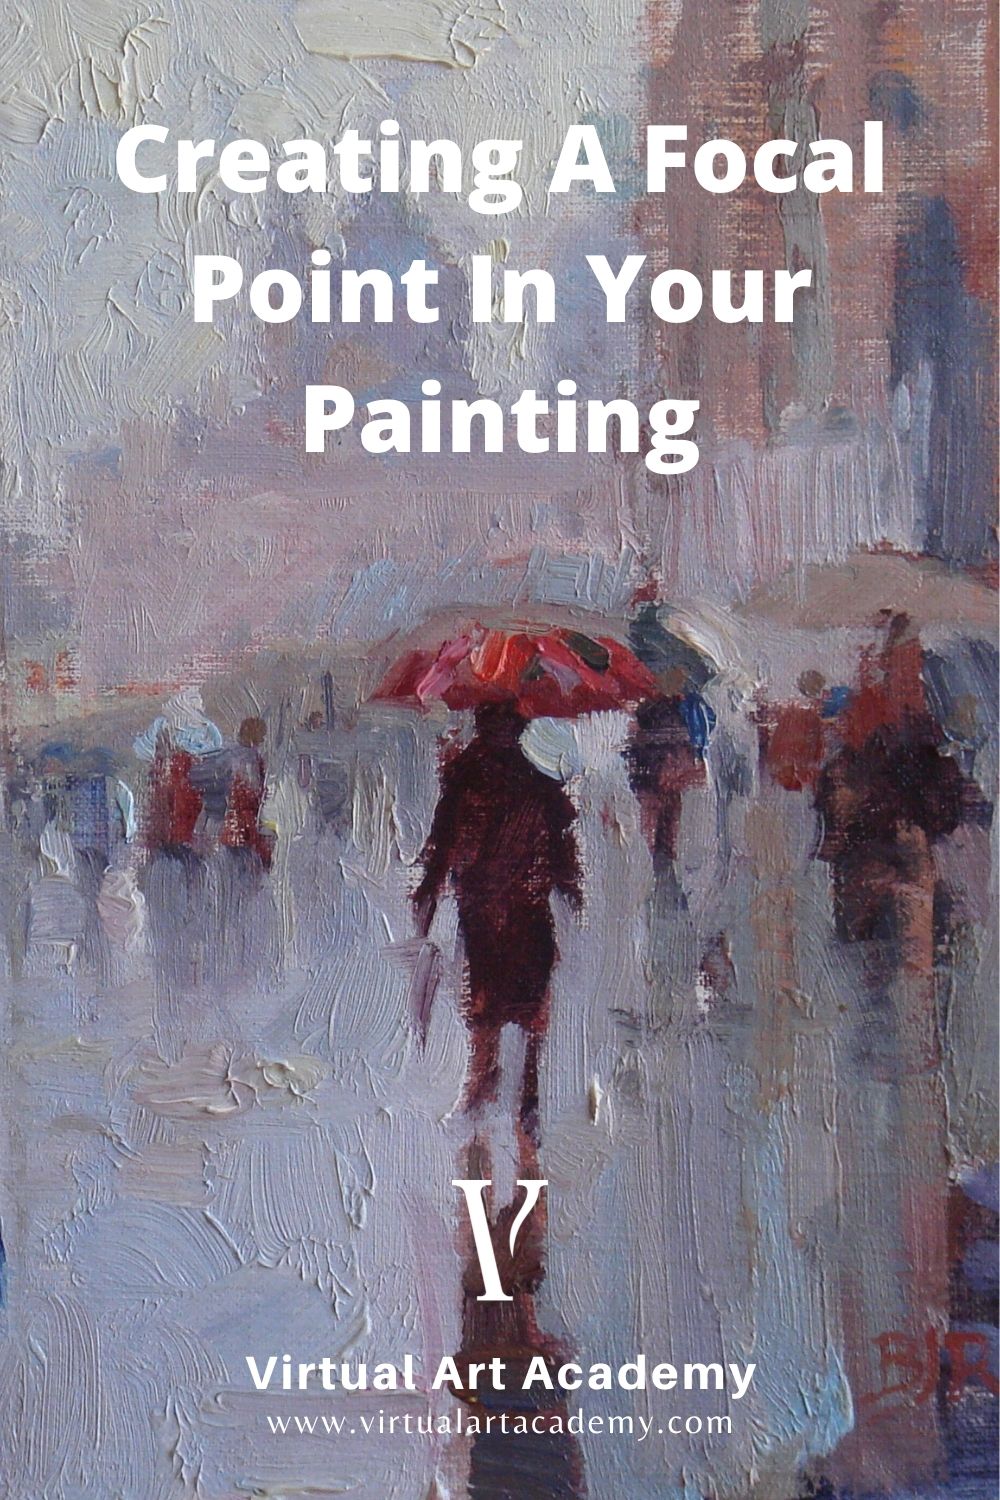 Creating A Focal Point In Your Painting: 5 Techniques